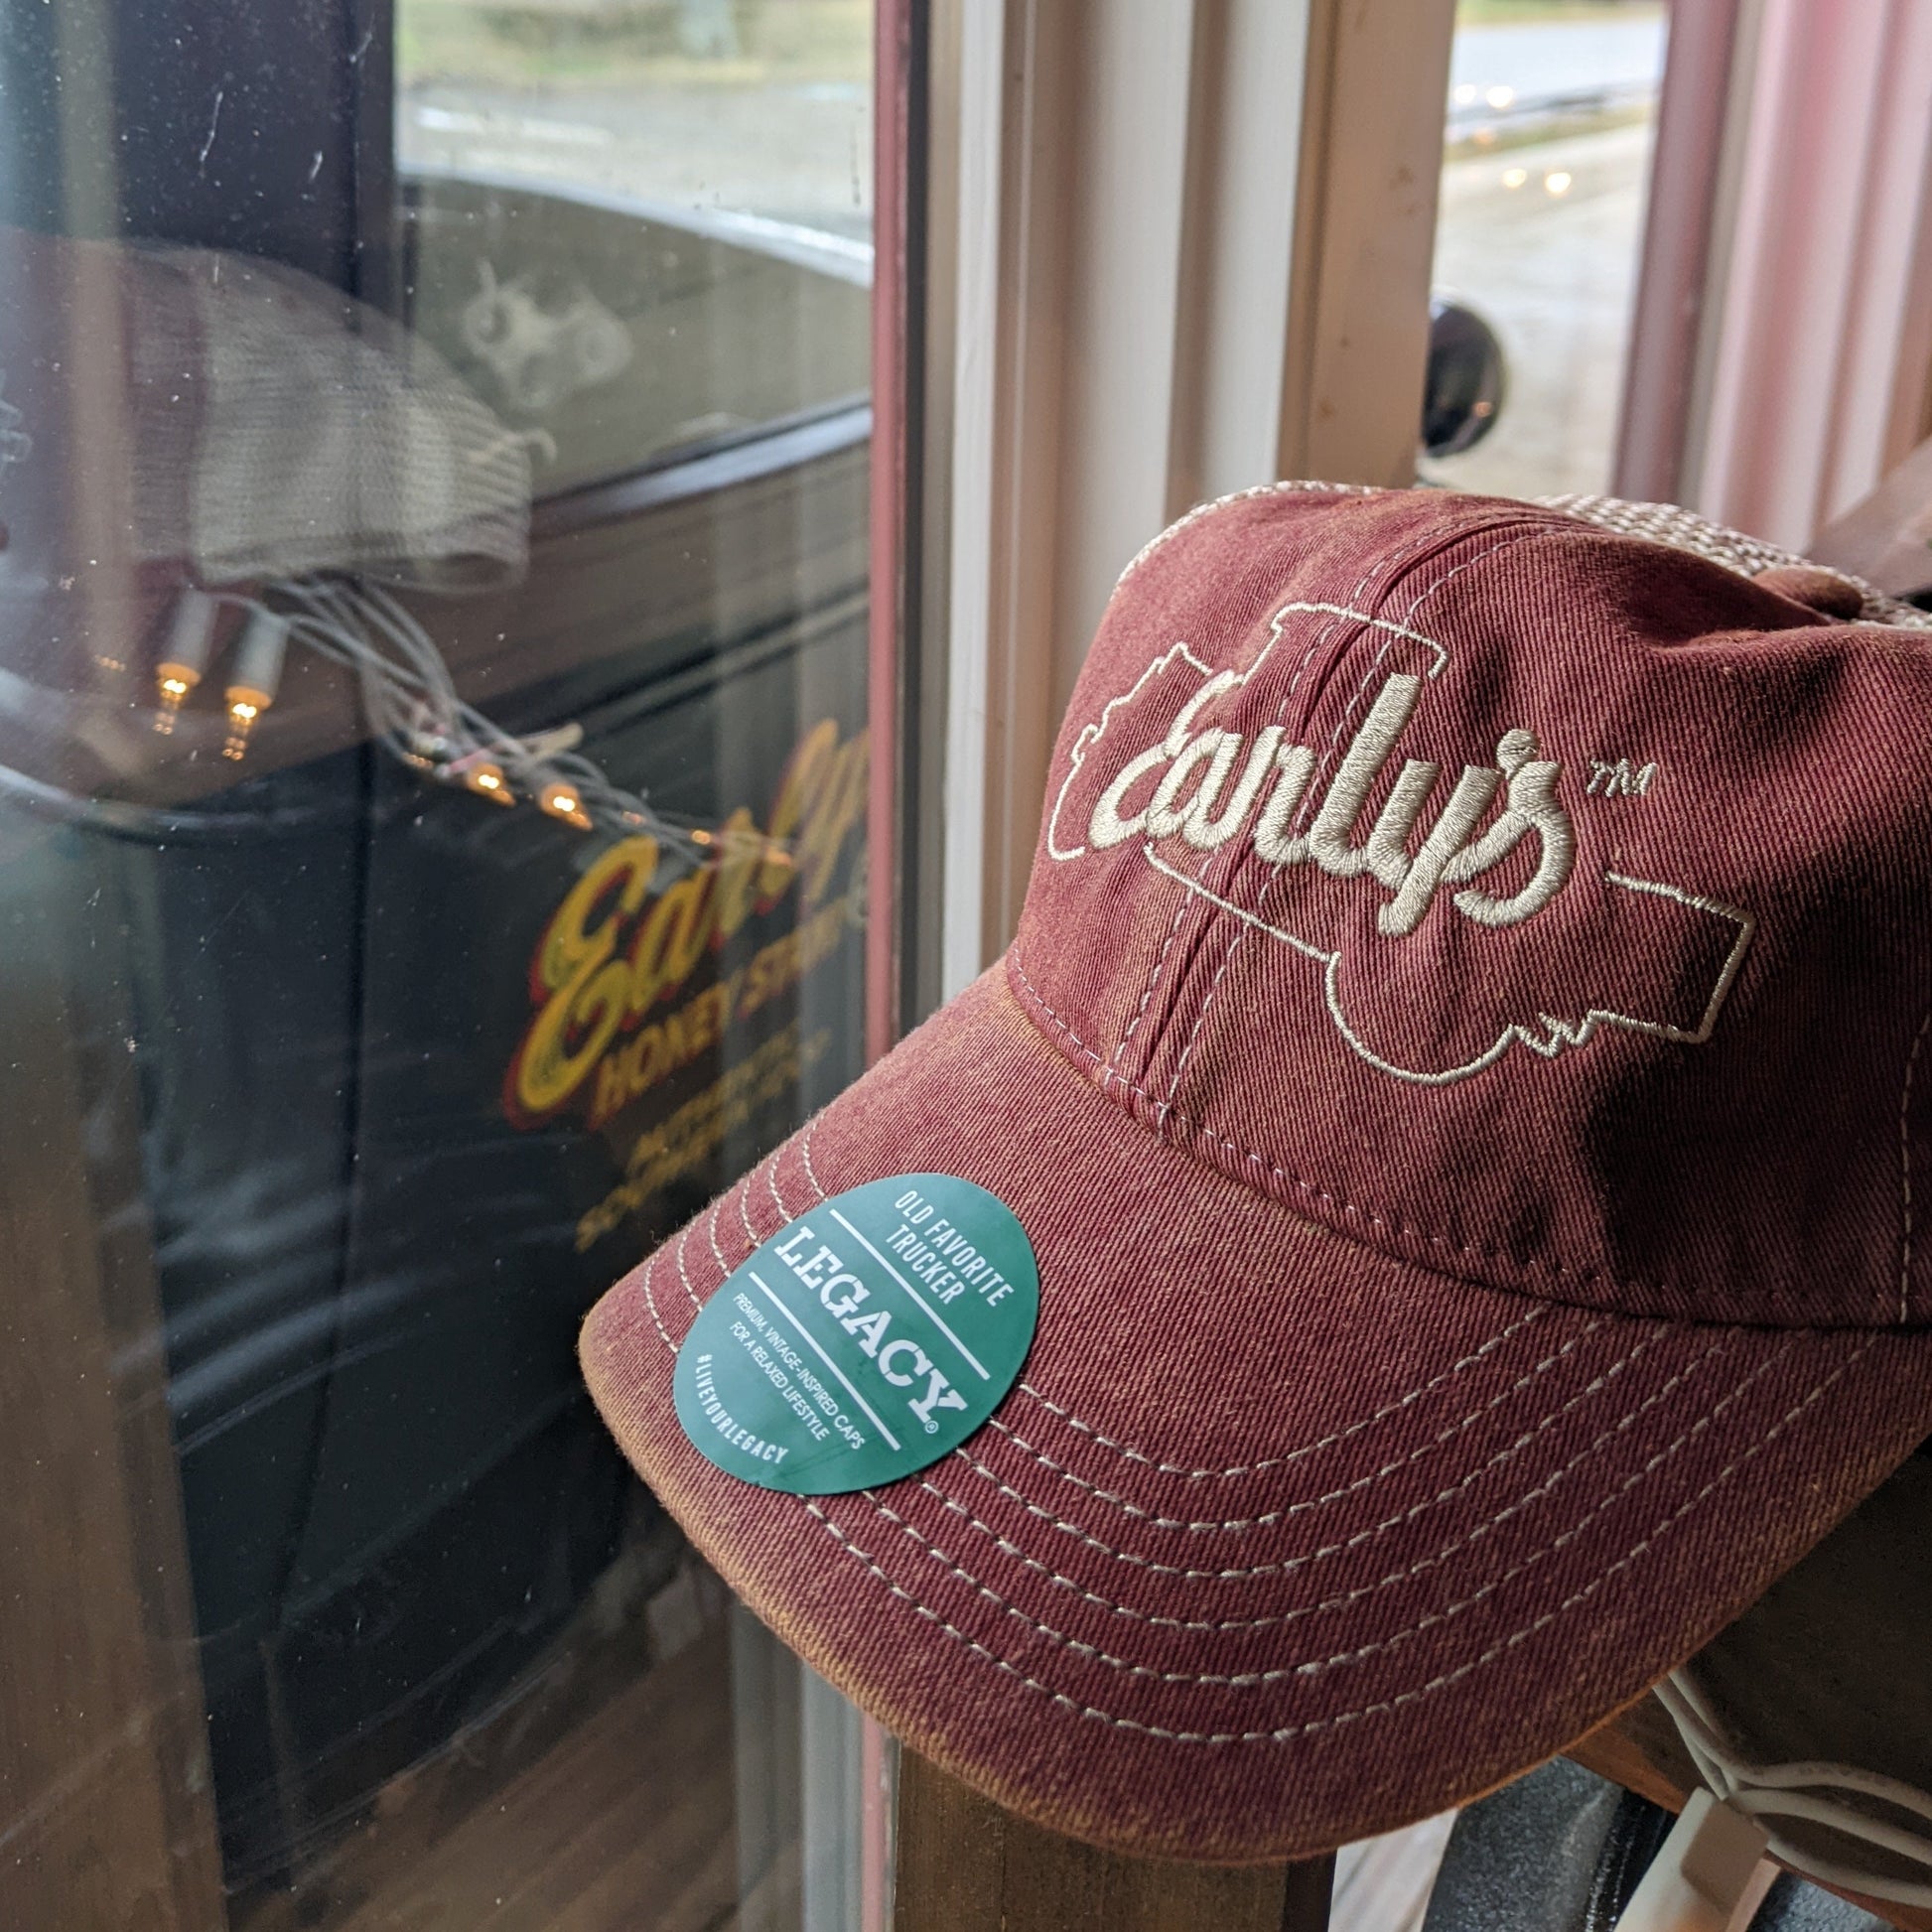 Early's Truck Hat